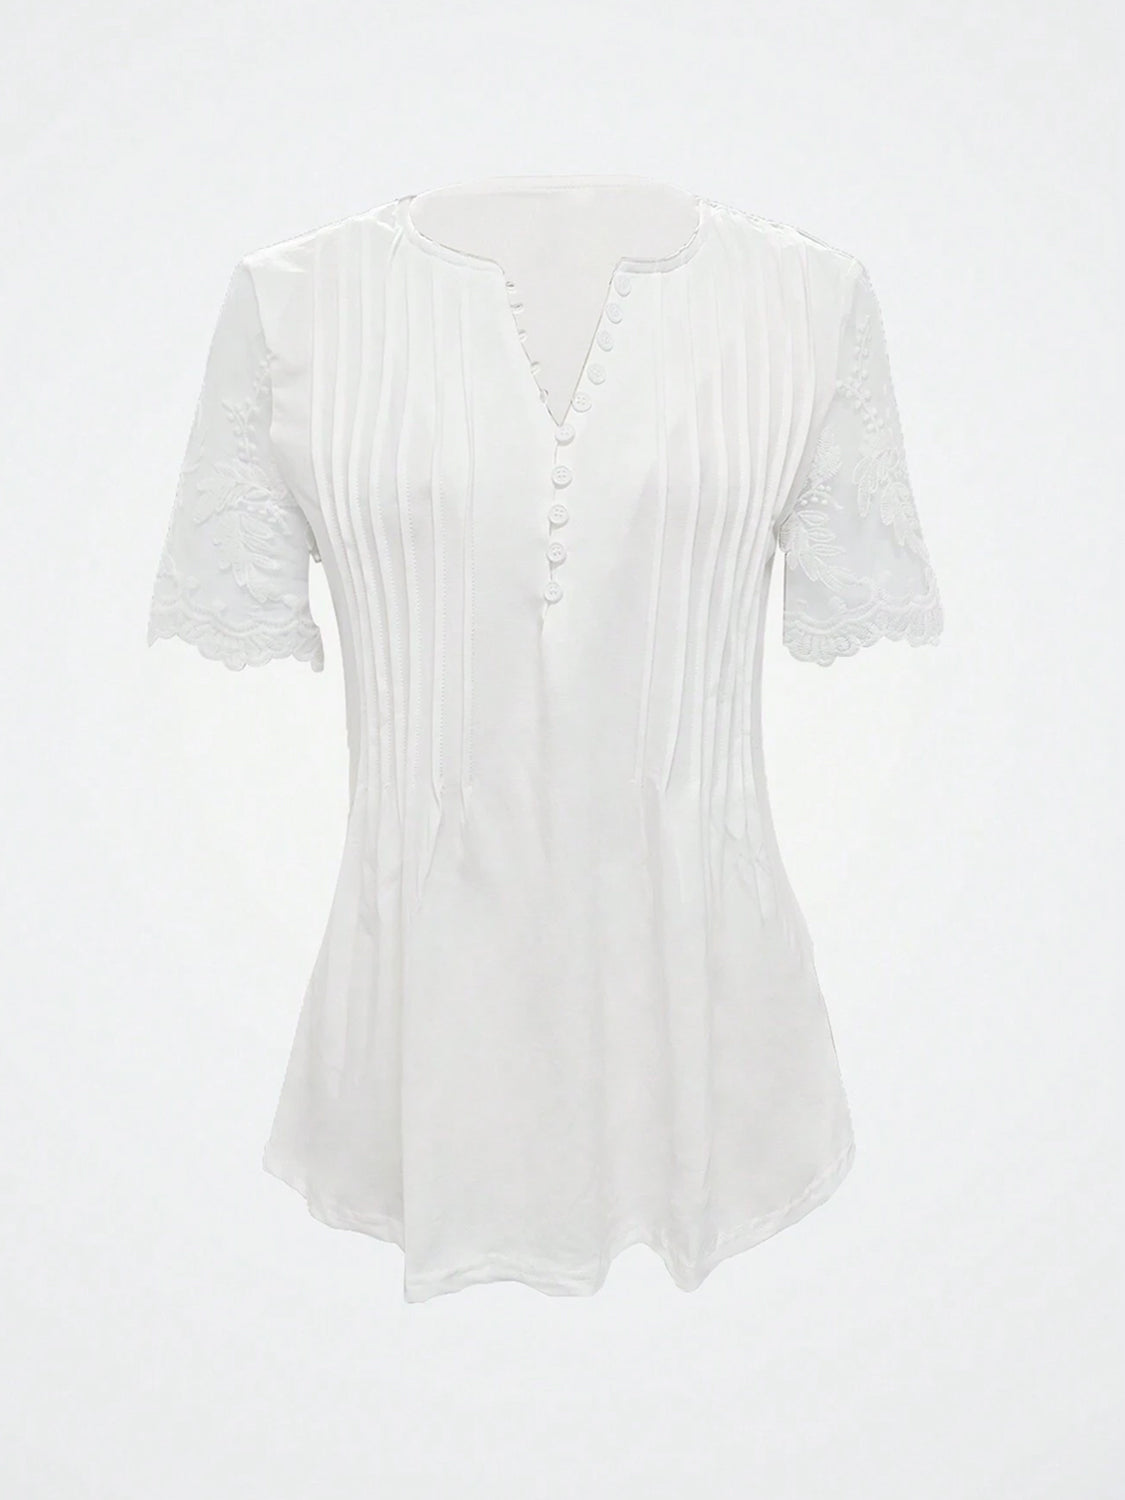 Notched Lace Short Sleeve Top